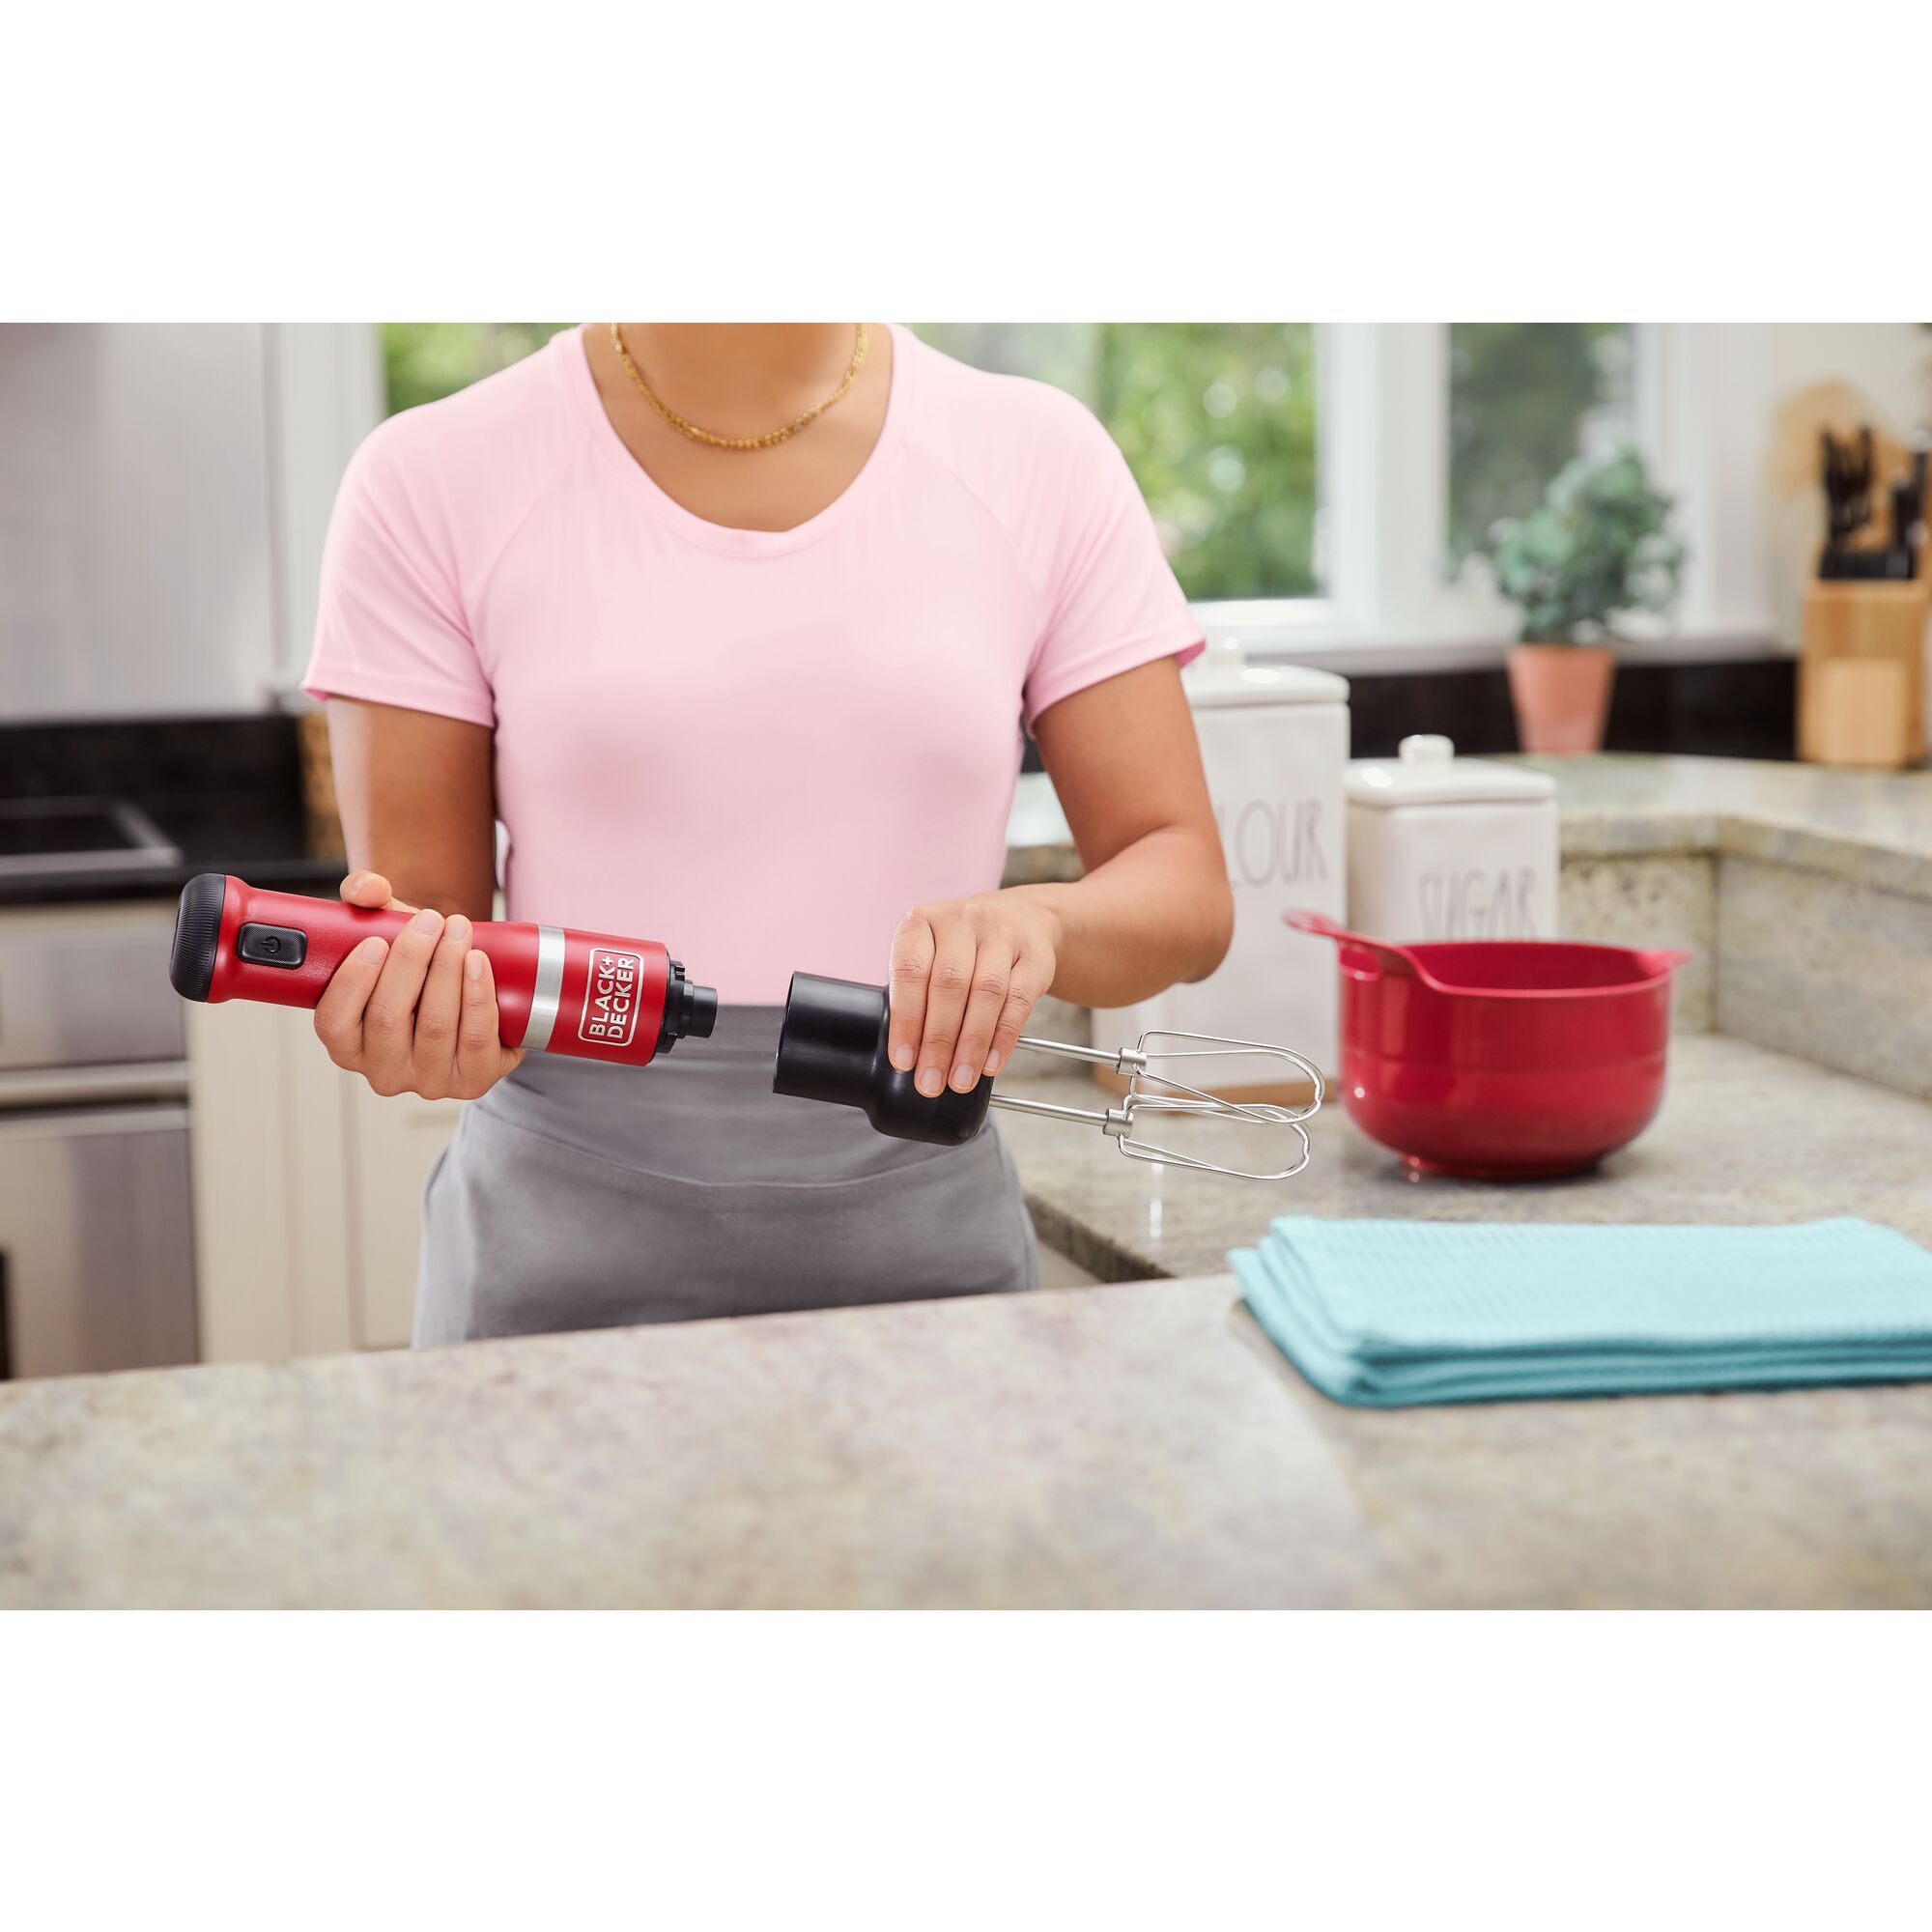 Model showing how to attach the BLACK+DECKER kitchen wand hand mixer attachment to the red power unit